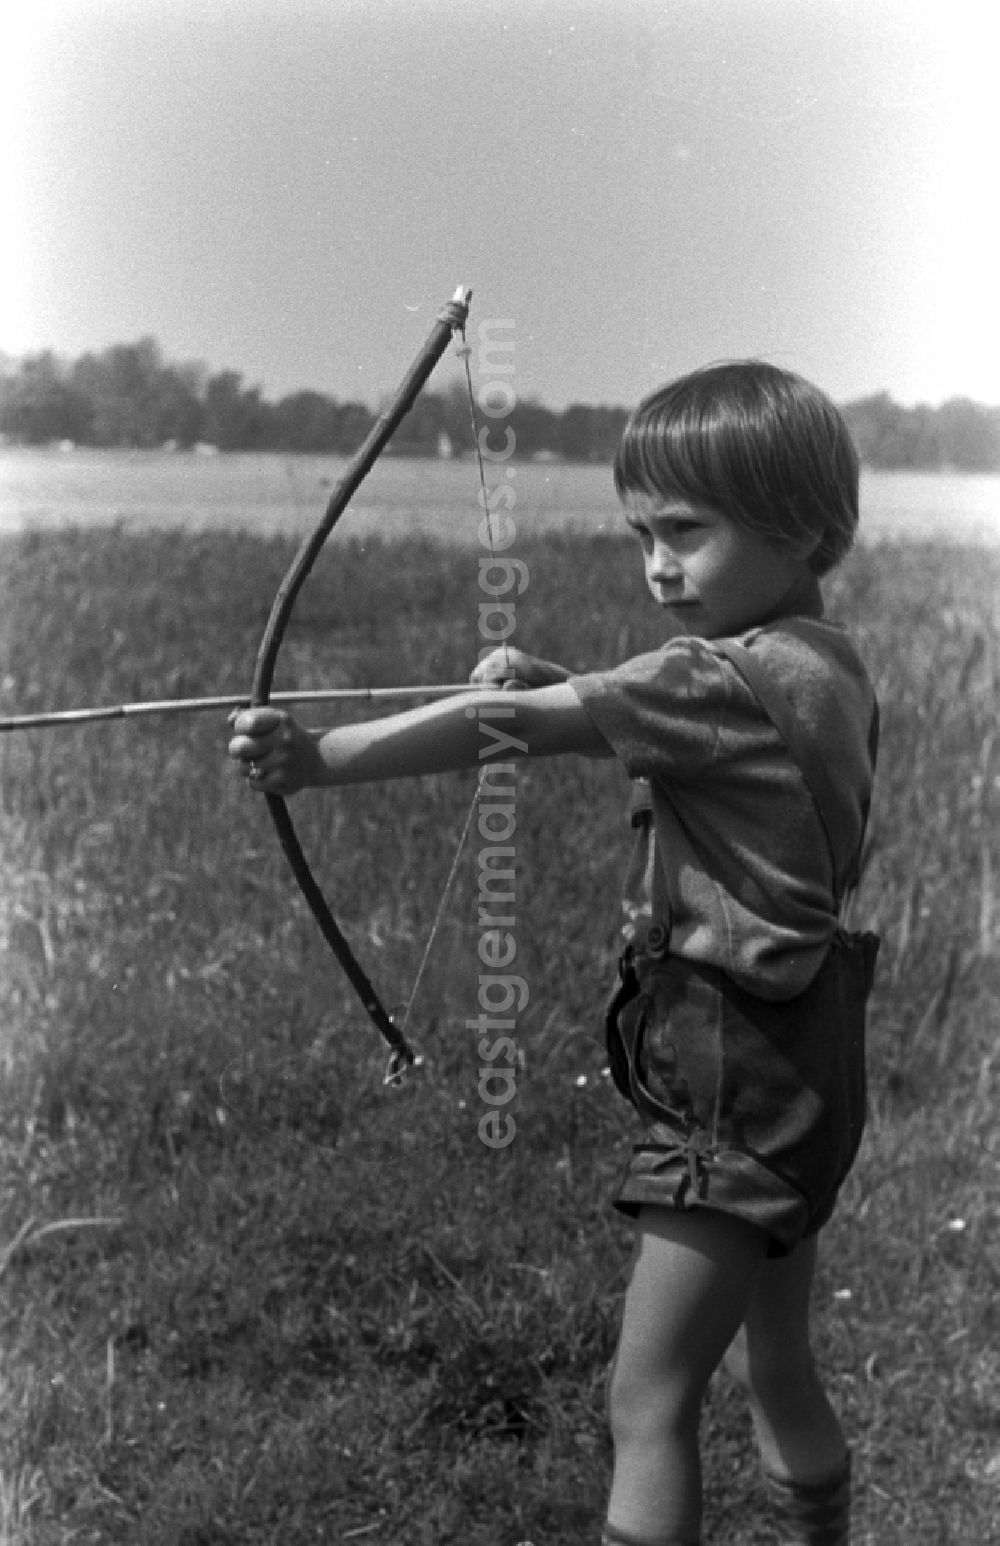 GDR image archive: Kirchmöser - A small child in leather pants playing with bow and arrow on a meadow in Brandenburg